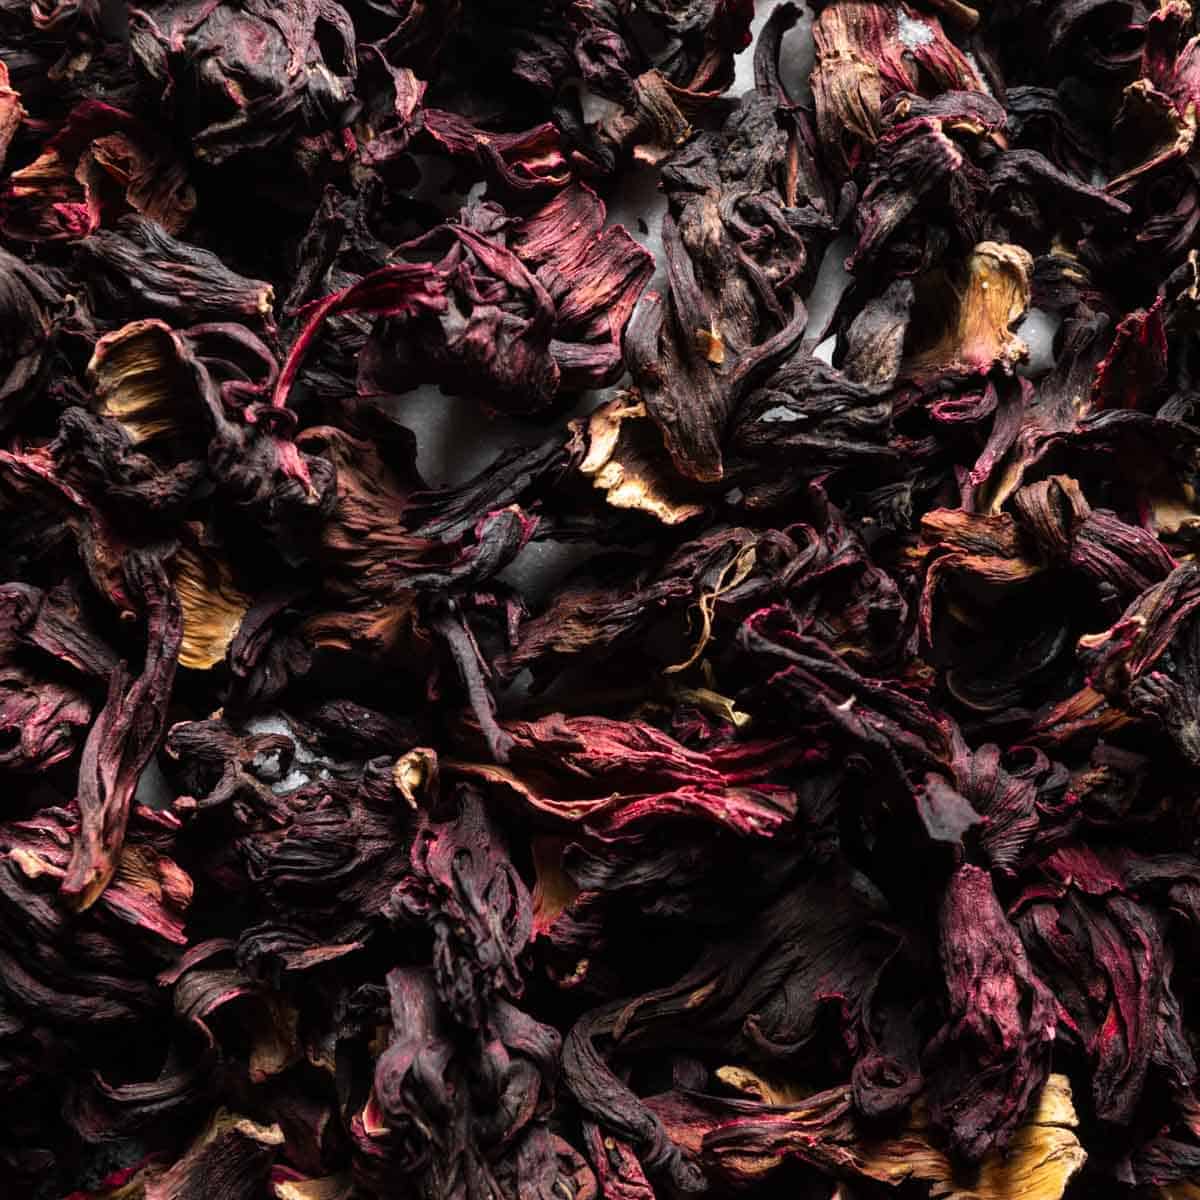 A close-up image of dried hibiscus flowers